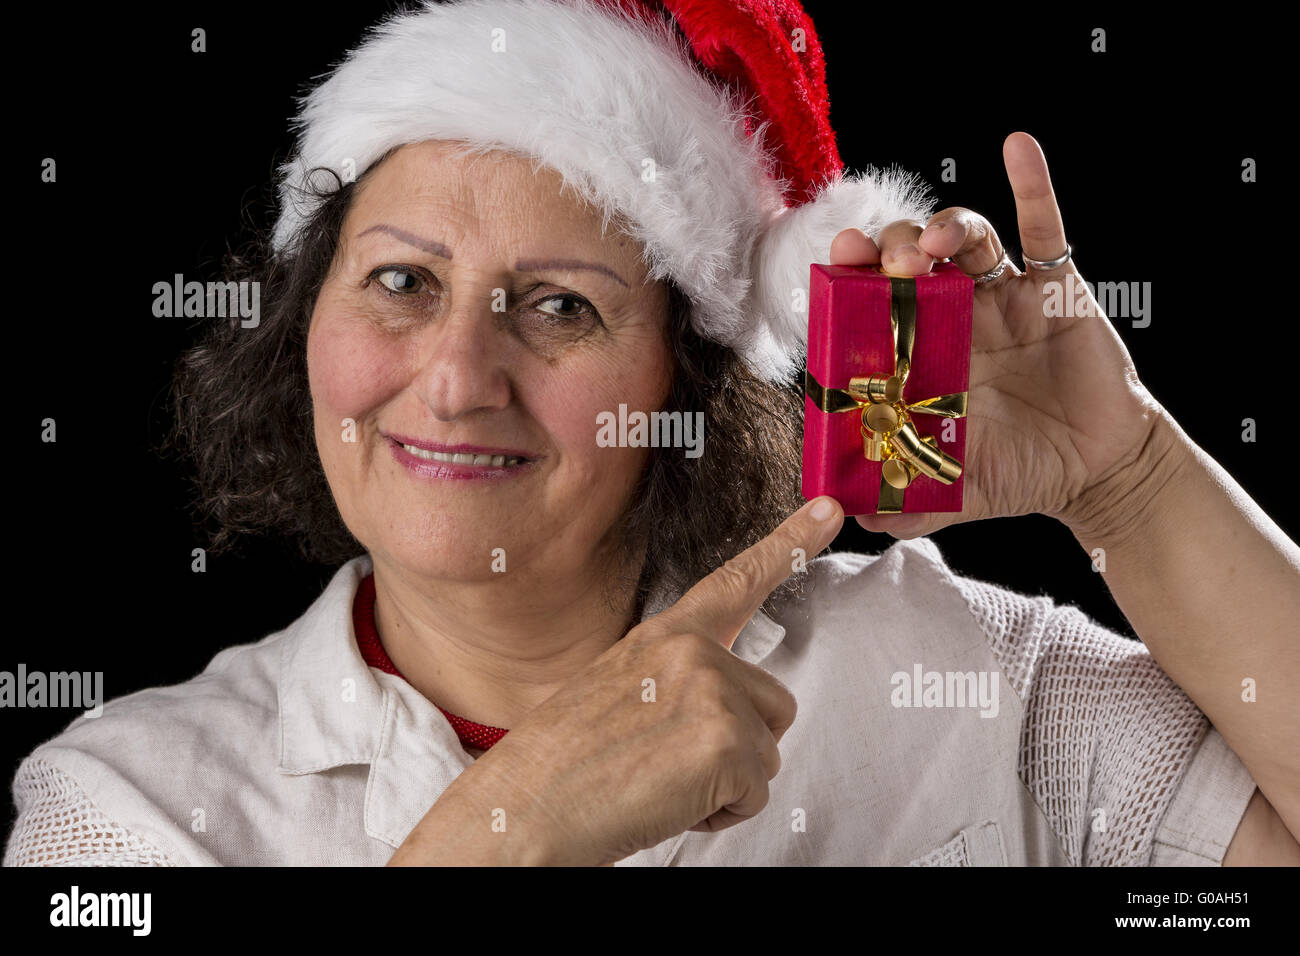 Smiling Aged Woman Holding and Pointing at Red Gif Stock Photo